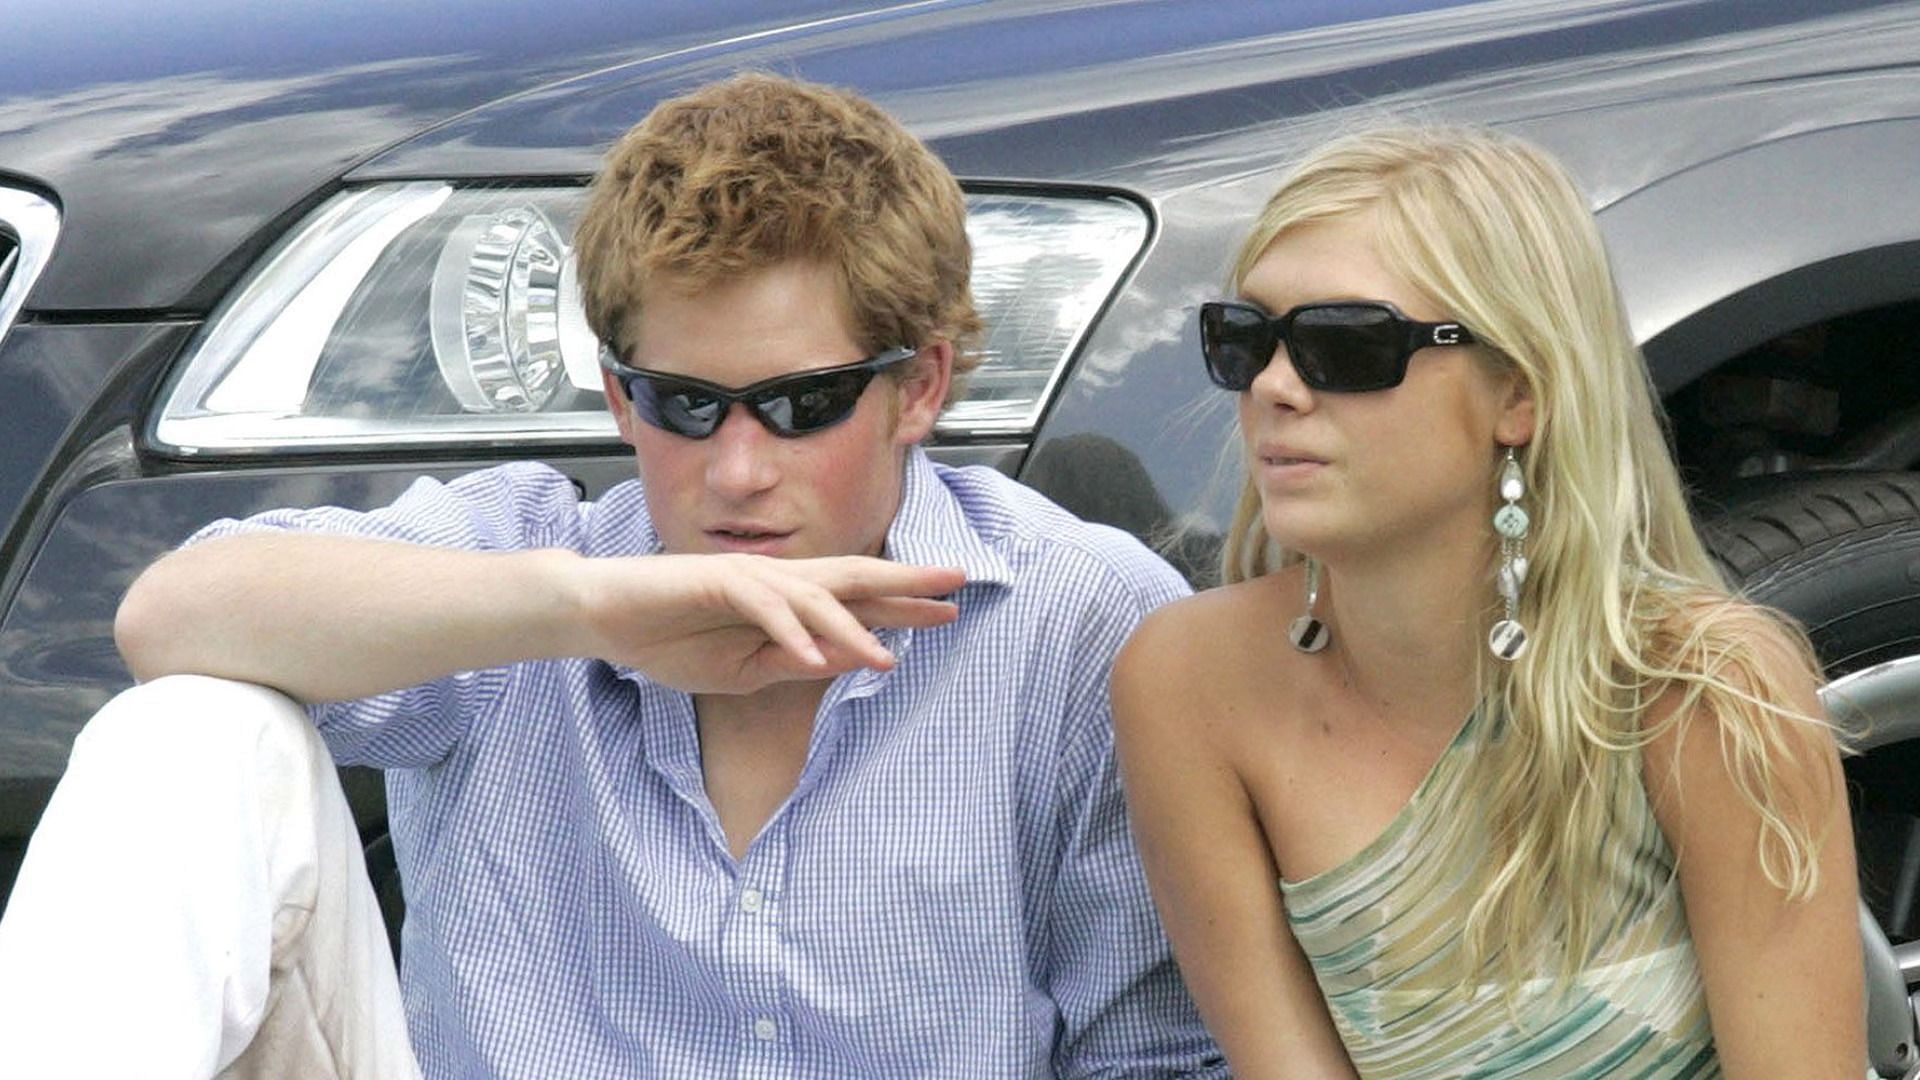 Prince Harry and Chelsy Davy dated on and off for seven years between 2004 to 2011 (Image via Getty Images/ MJ Kim)